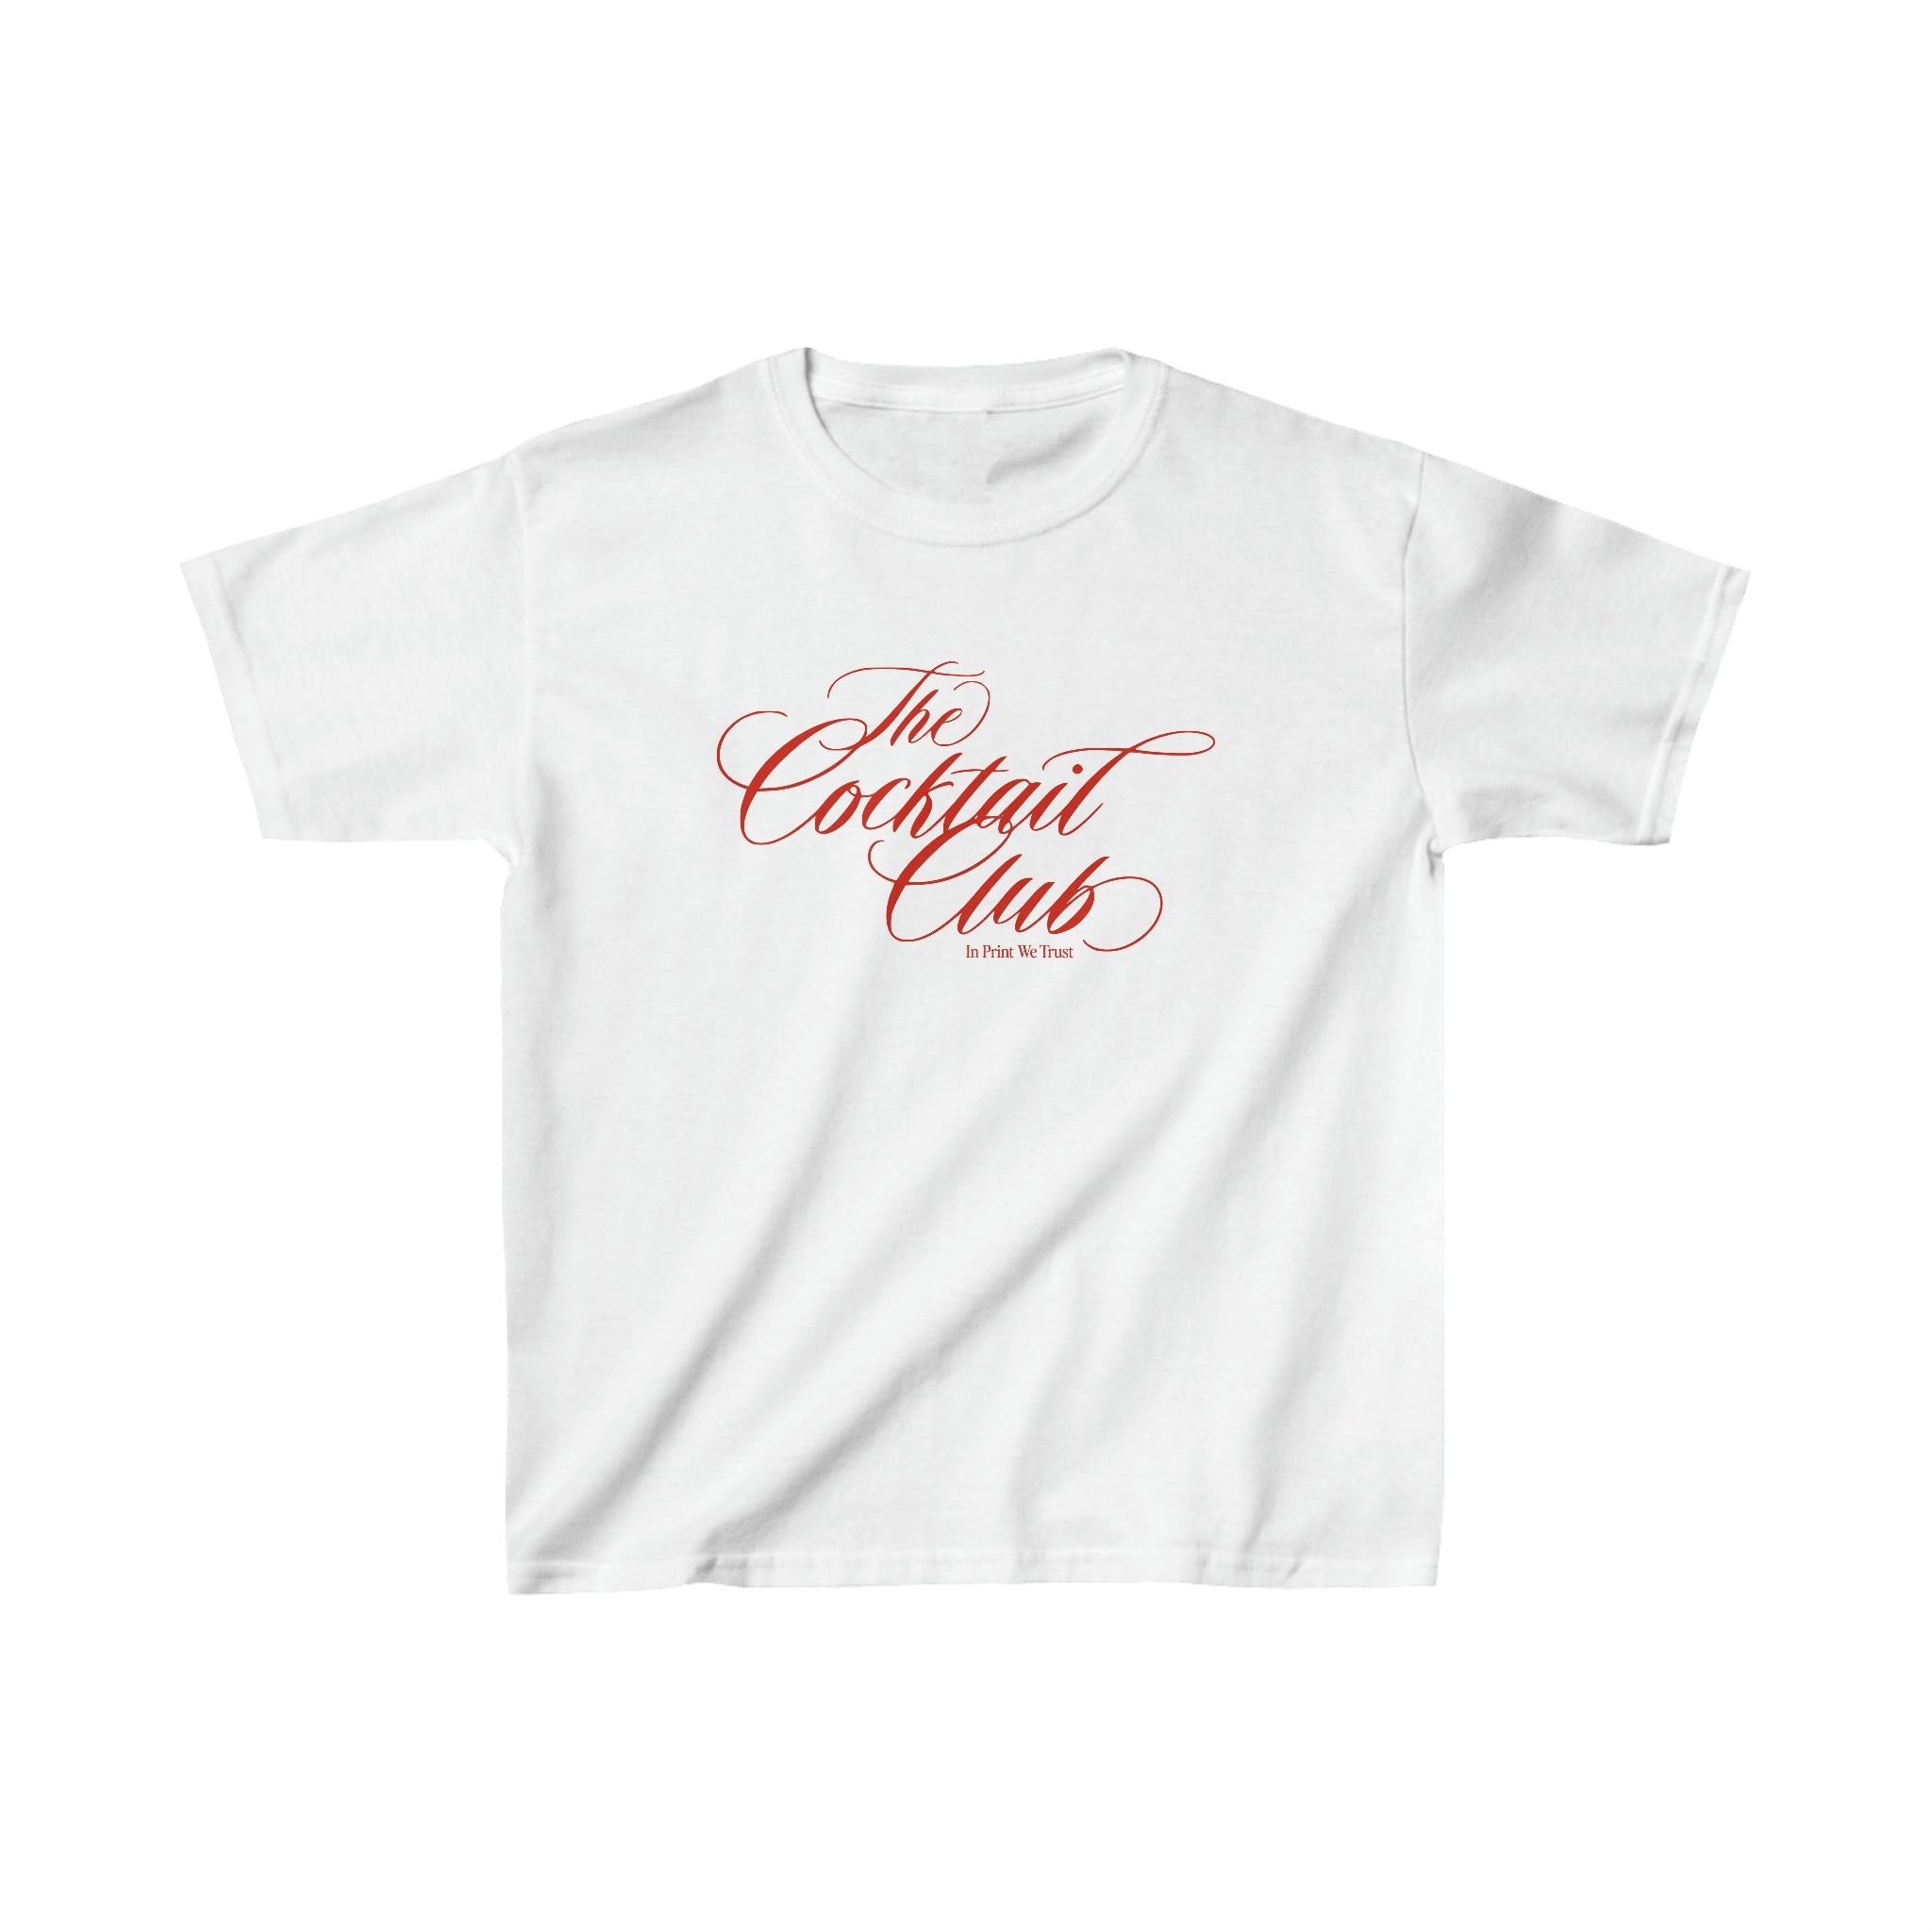 'The Cocktail Club' baby tee - In Print We Trust